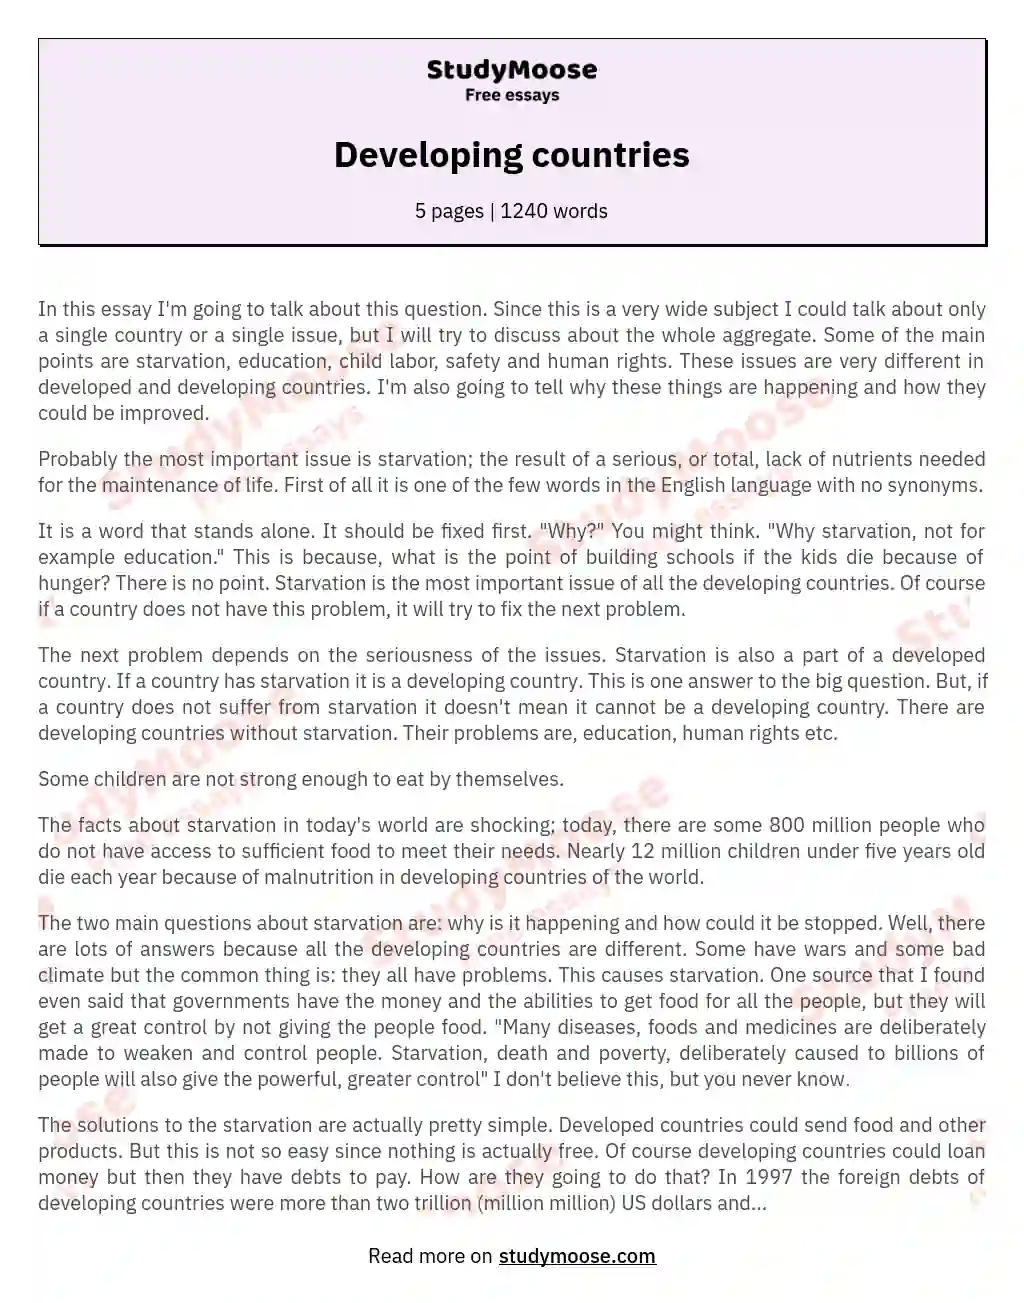 essay developing countries